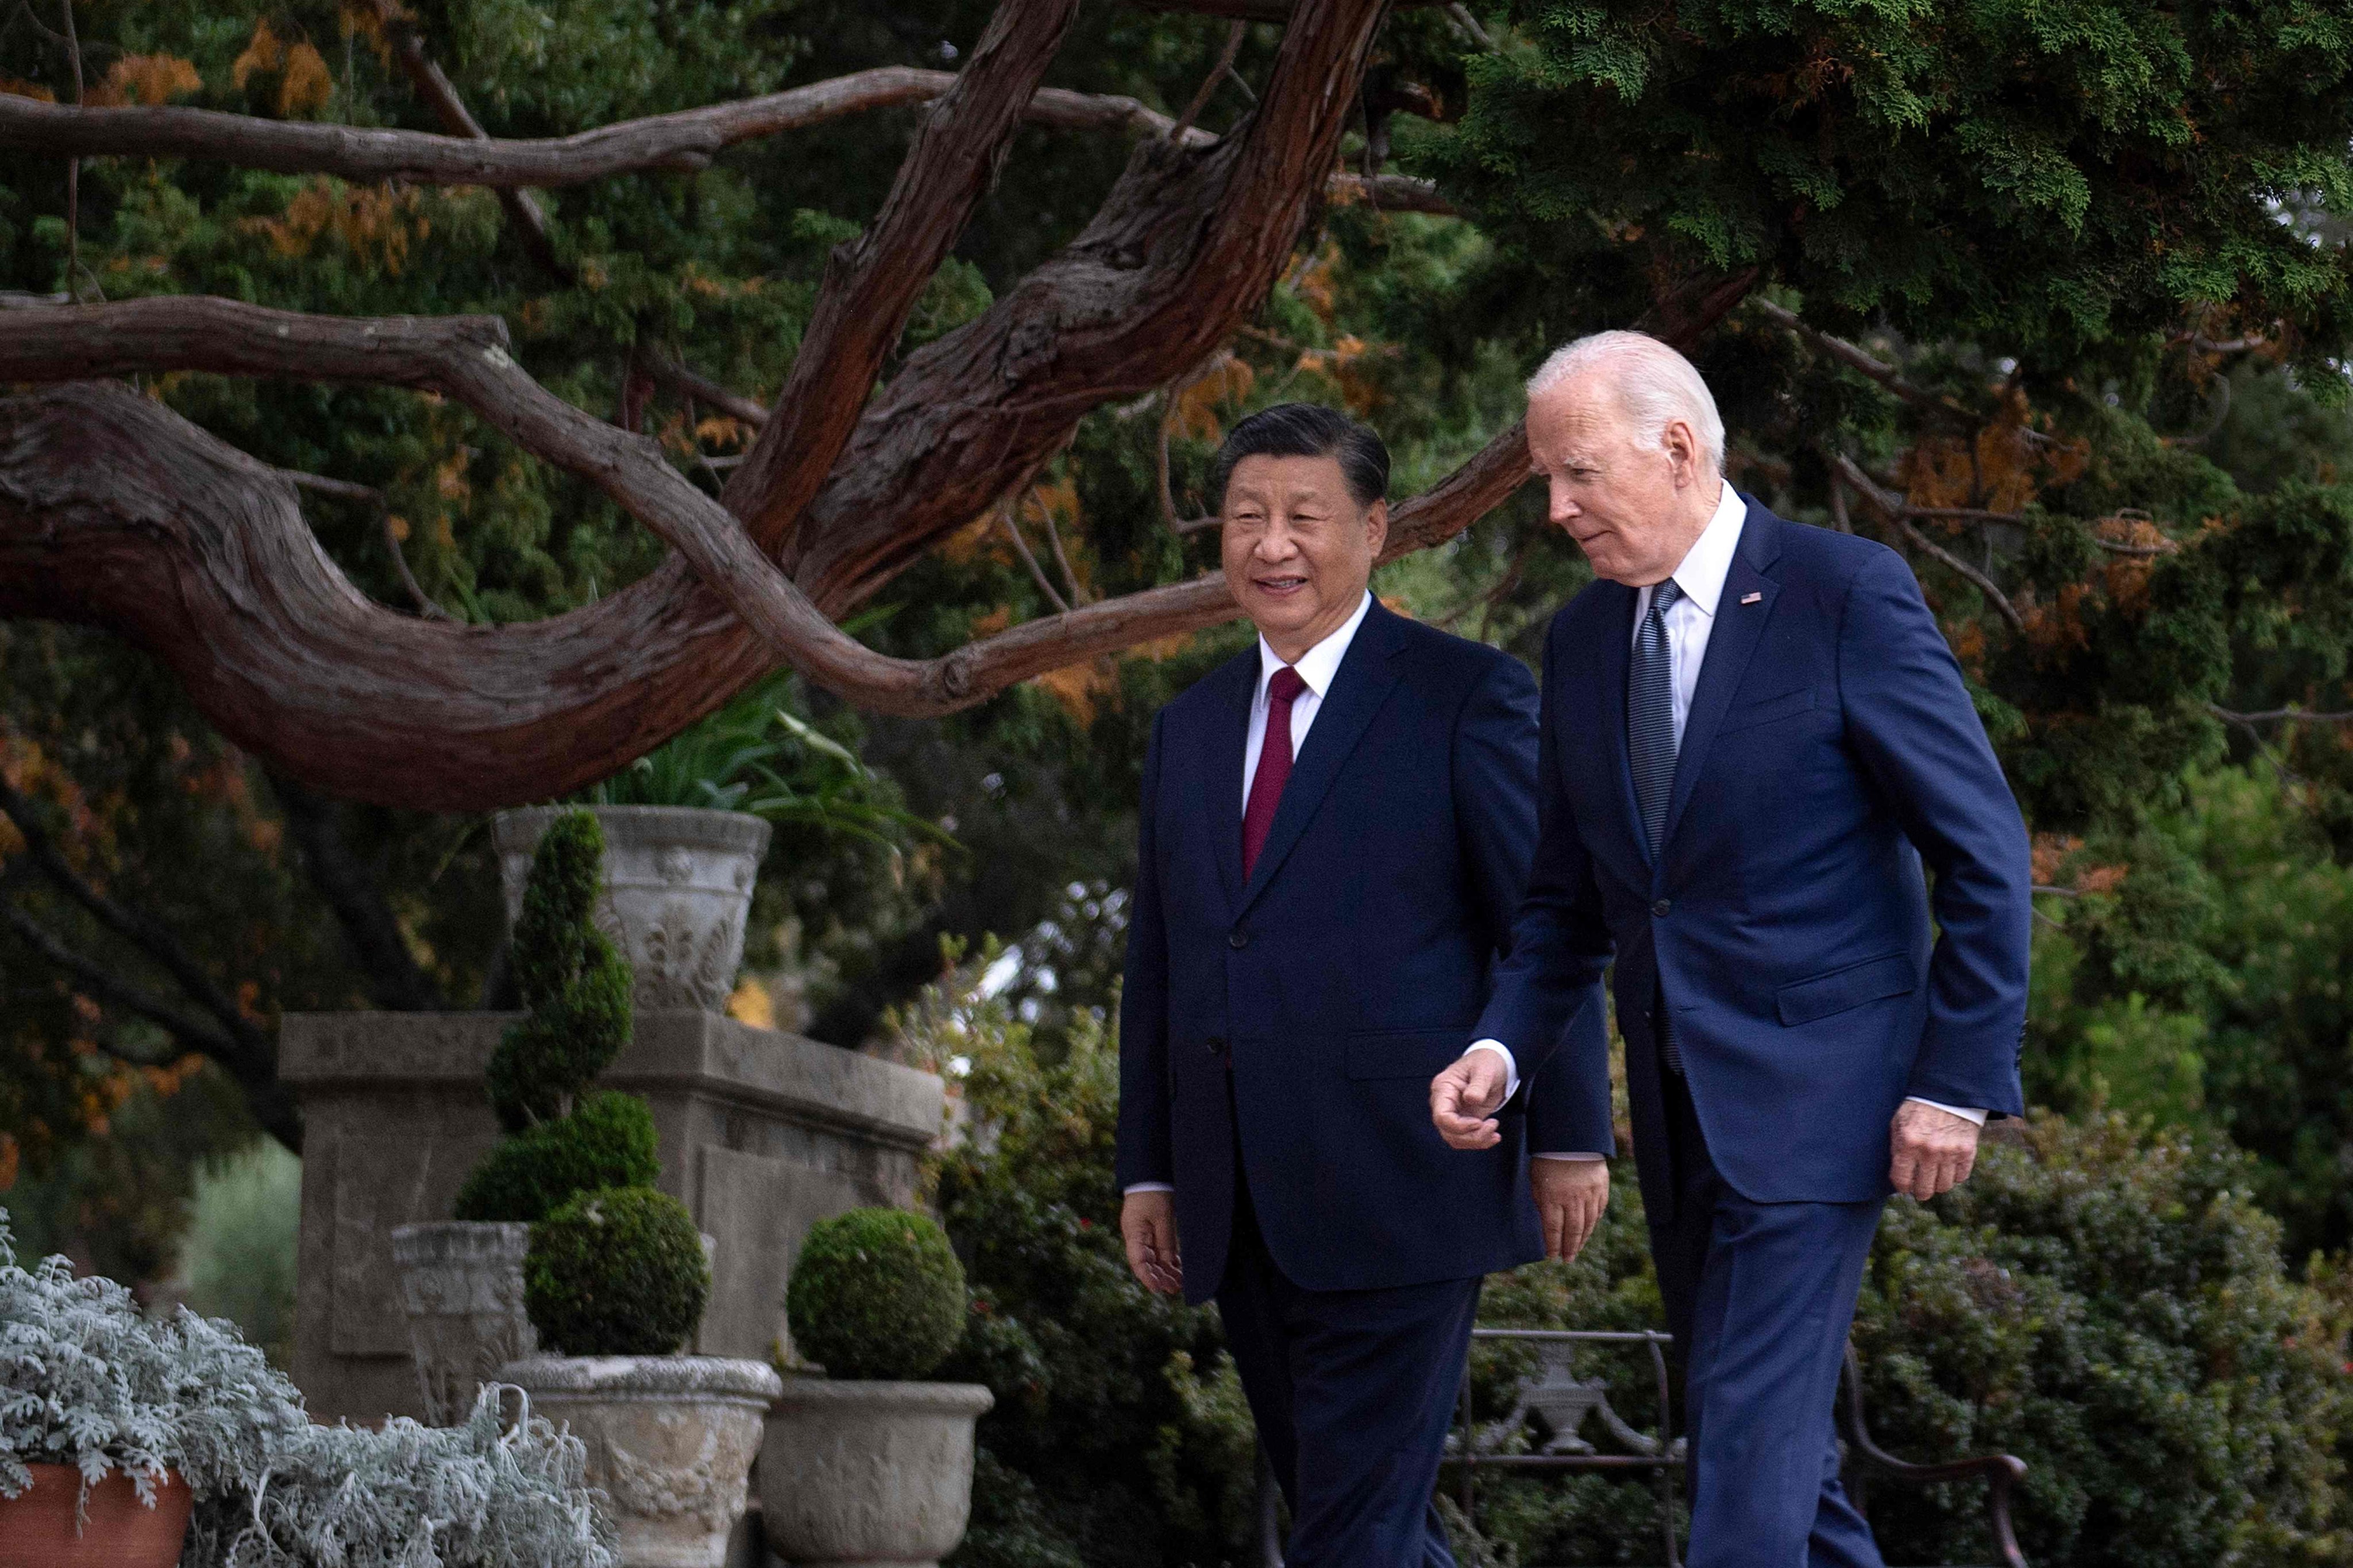 Chinese President Xi Jinping (left) and US President Joe Biden stroll through the gardens at the Filoli estate in Woodside, California on Wednesday. Photo: AFP